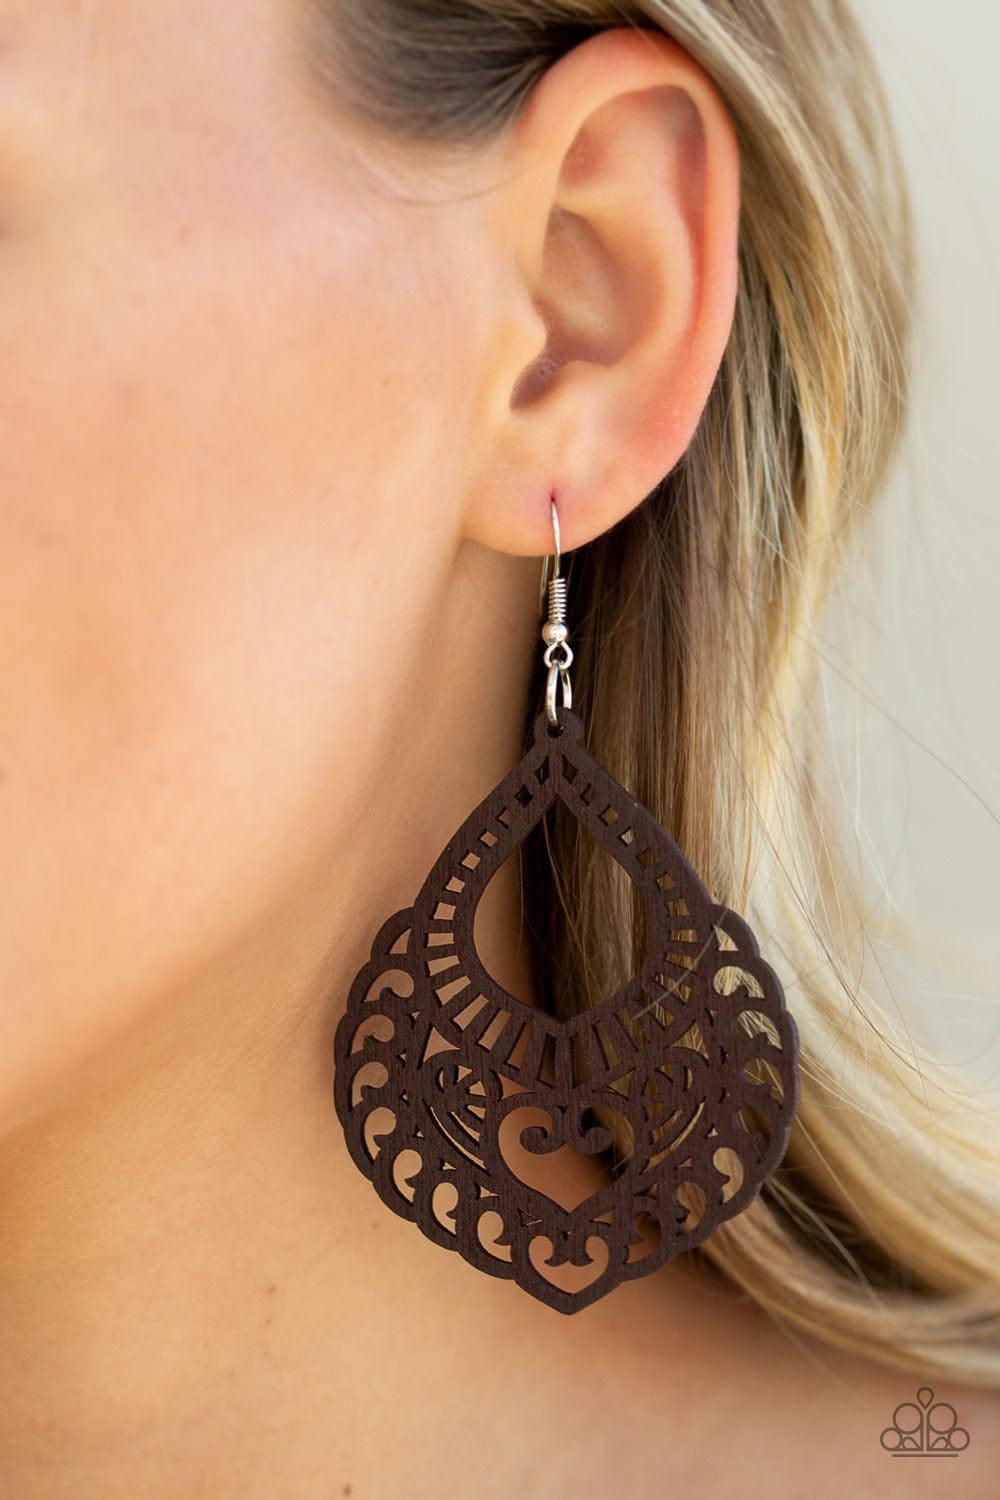 Paparazzi Accessories - If You Wood Be So Kind - Brown Earrings - Bling by JessieK